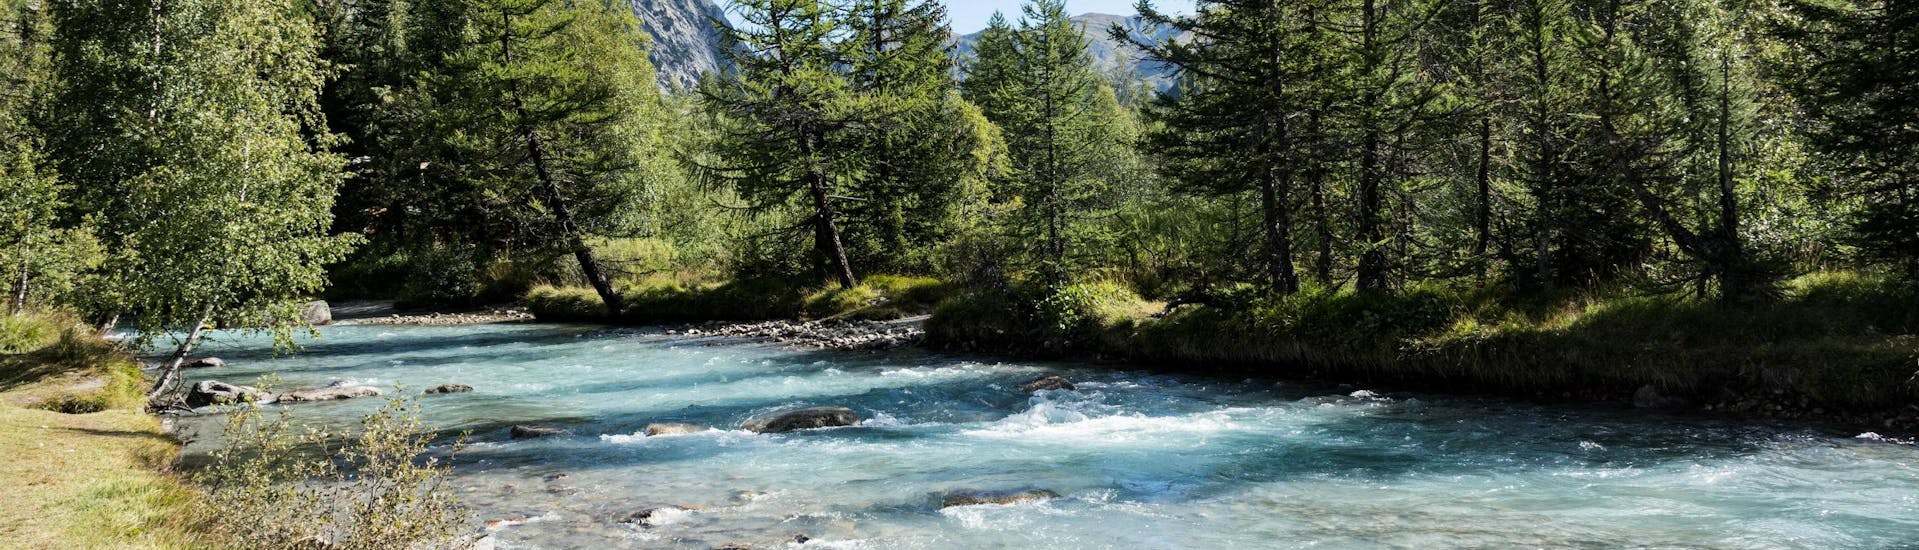 An image of a river flowing through the picturesque mountain scenery that people who go rafting in Aosta Valley get to experience.